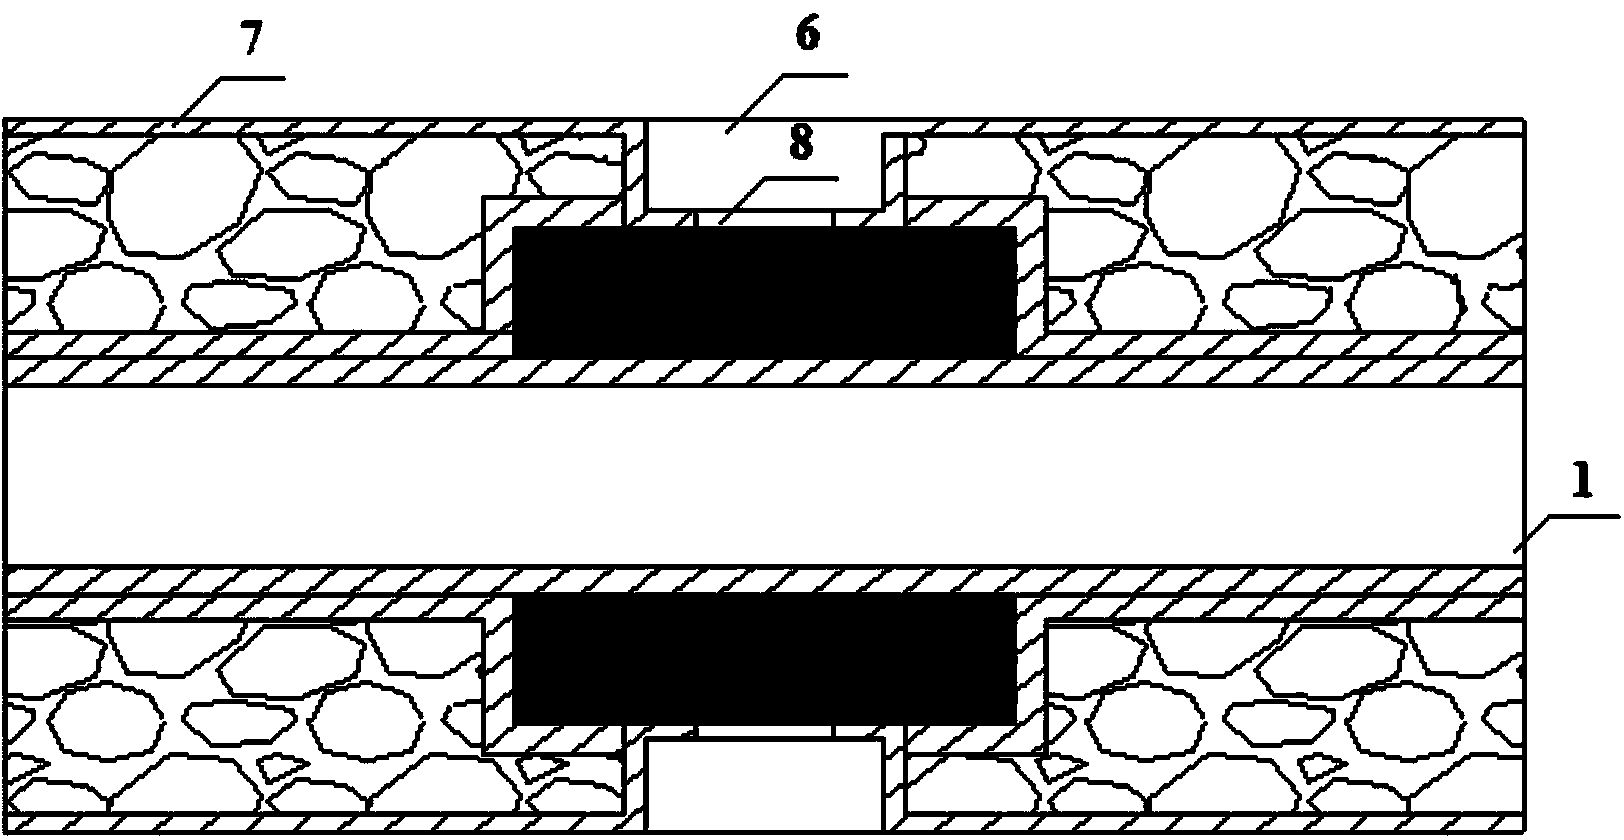 Printed circuit board blind hole manufacturing method and structure